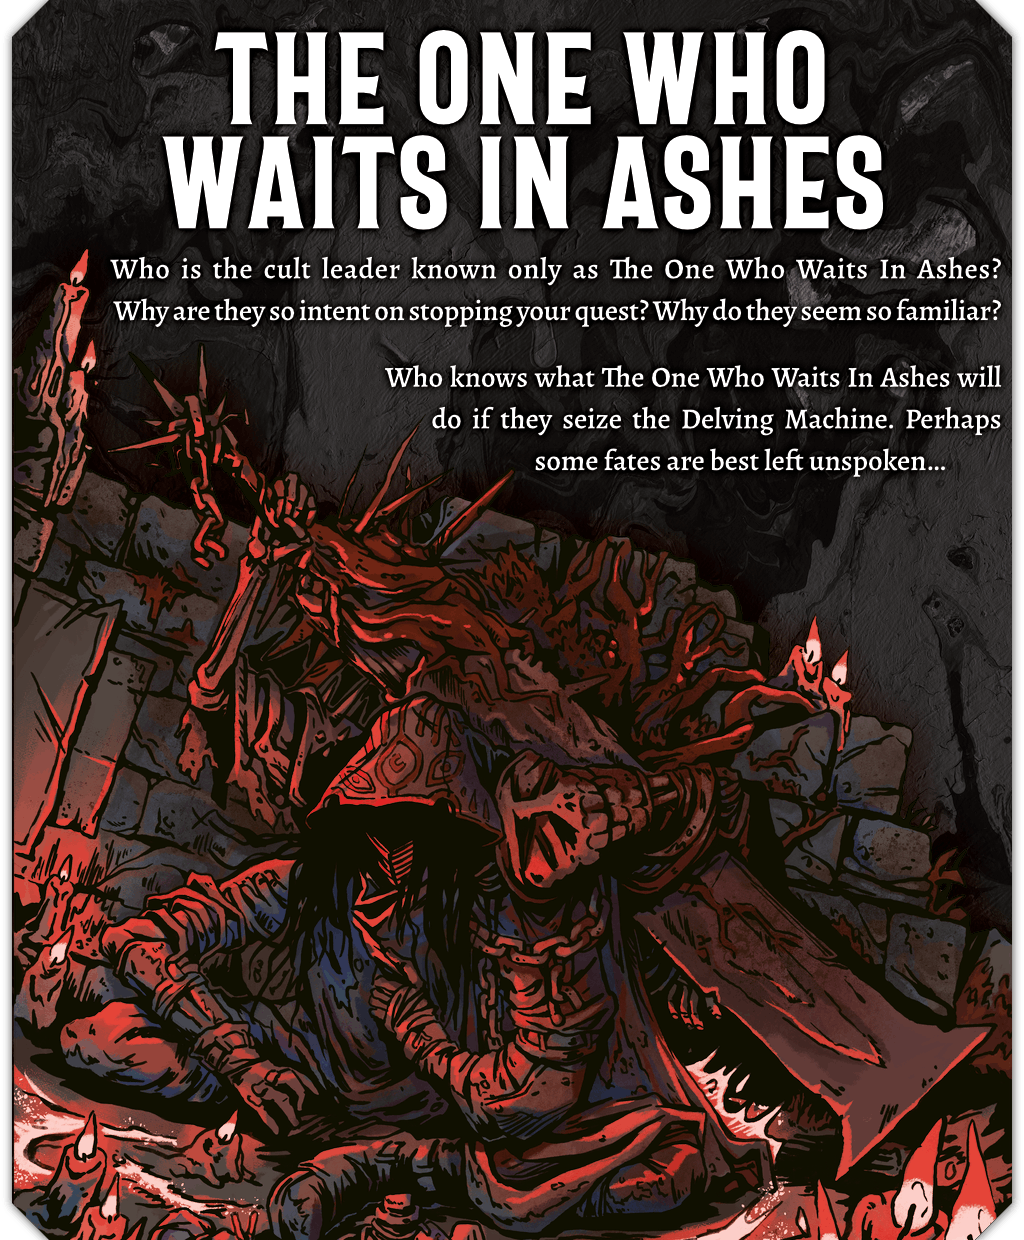 Illustration of The One Who Waits in Ashes, a hunched and hooded figure sitting cross-legged on the ground. They rest a large greatsword over their shoulder in one skeletal arm, while two other arms rest at their sides. The text reads: Who is the cult leader known only as The One Who Waits in Ashes? Why are they so intent on stopping your quest? Why do they seem so familiar? Who knows what The One Who Waits In Ashes will do if they seize the Delving Machine. Perhaps some fates are best left unspoken.